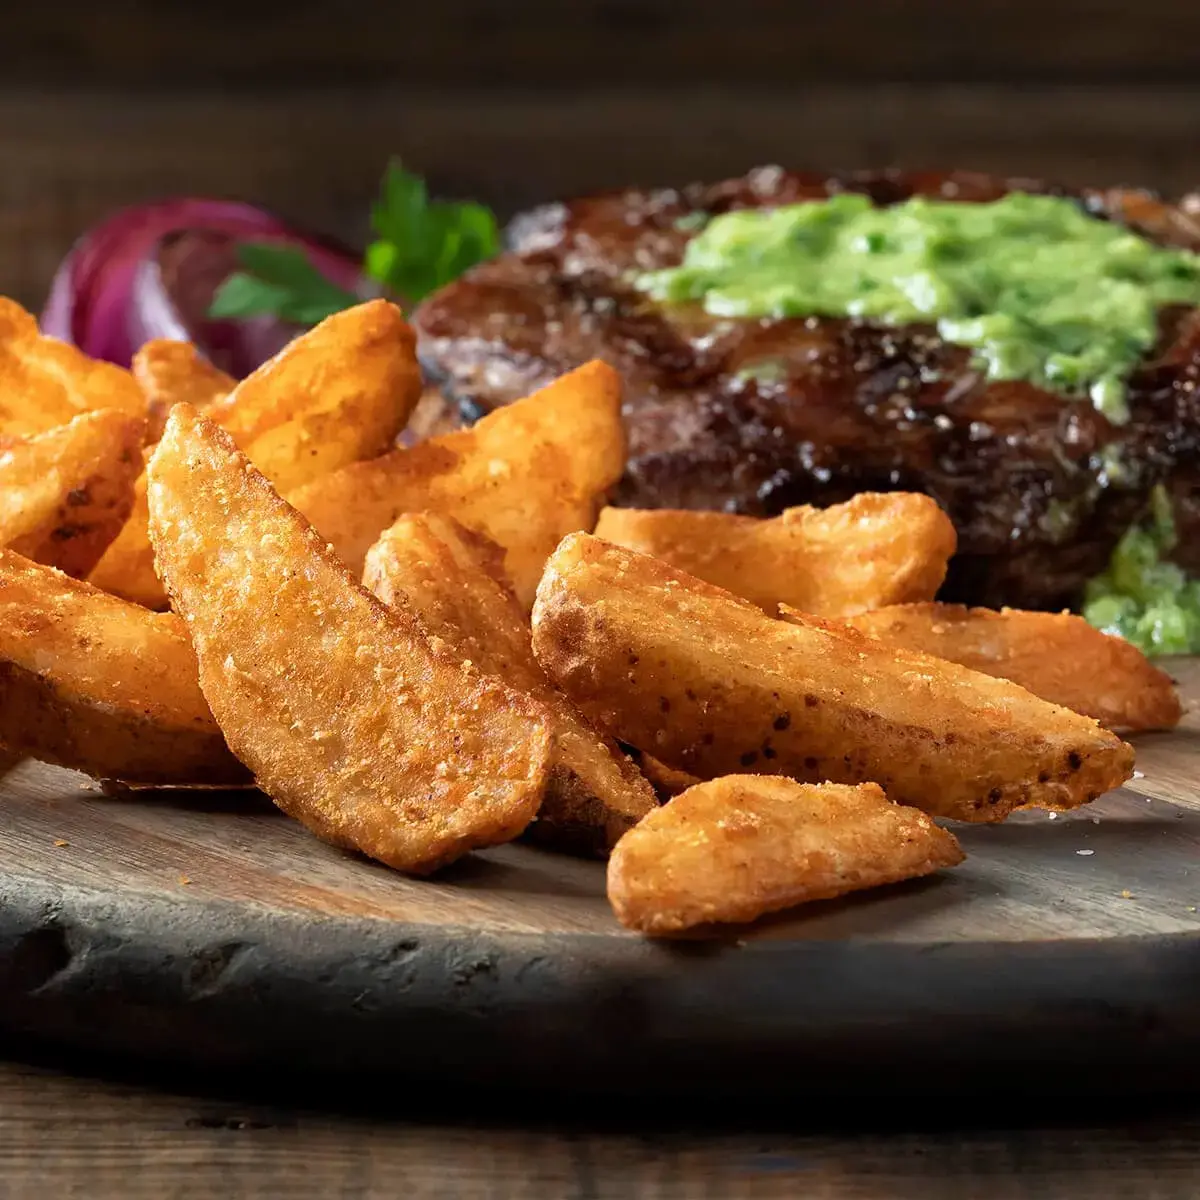 Steak and Wedge Fries with Avocado Maitre D' Butter.jpg